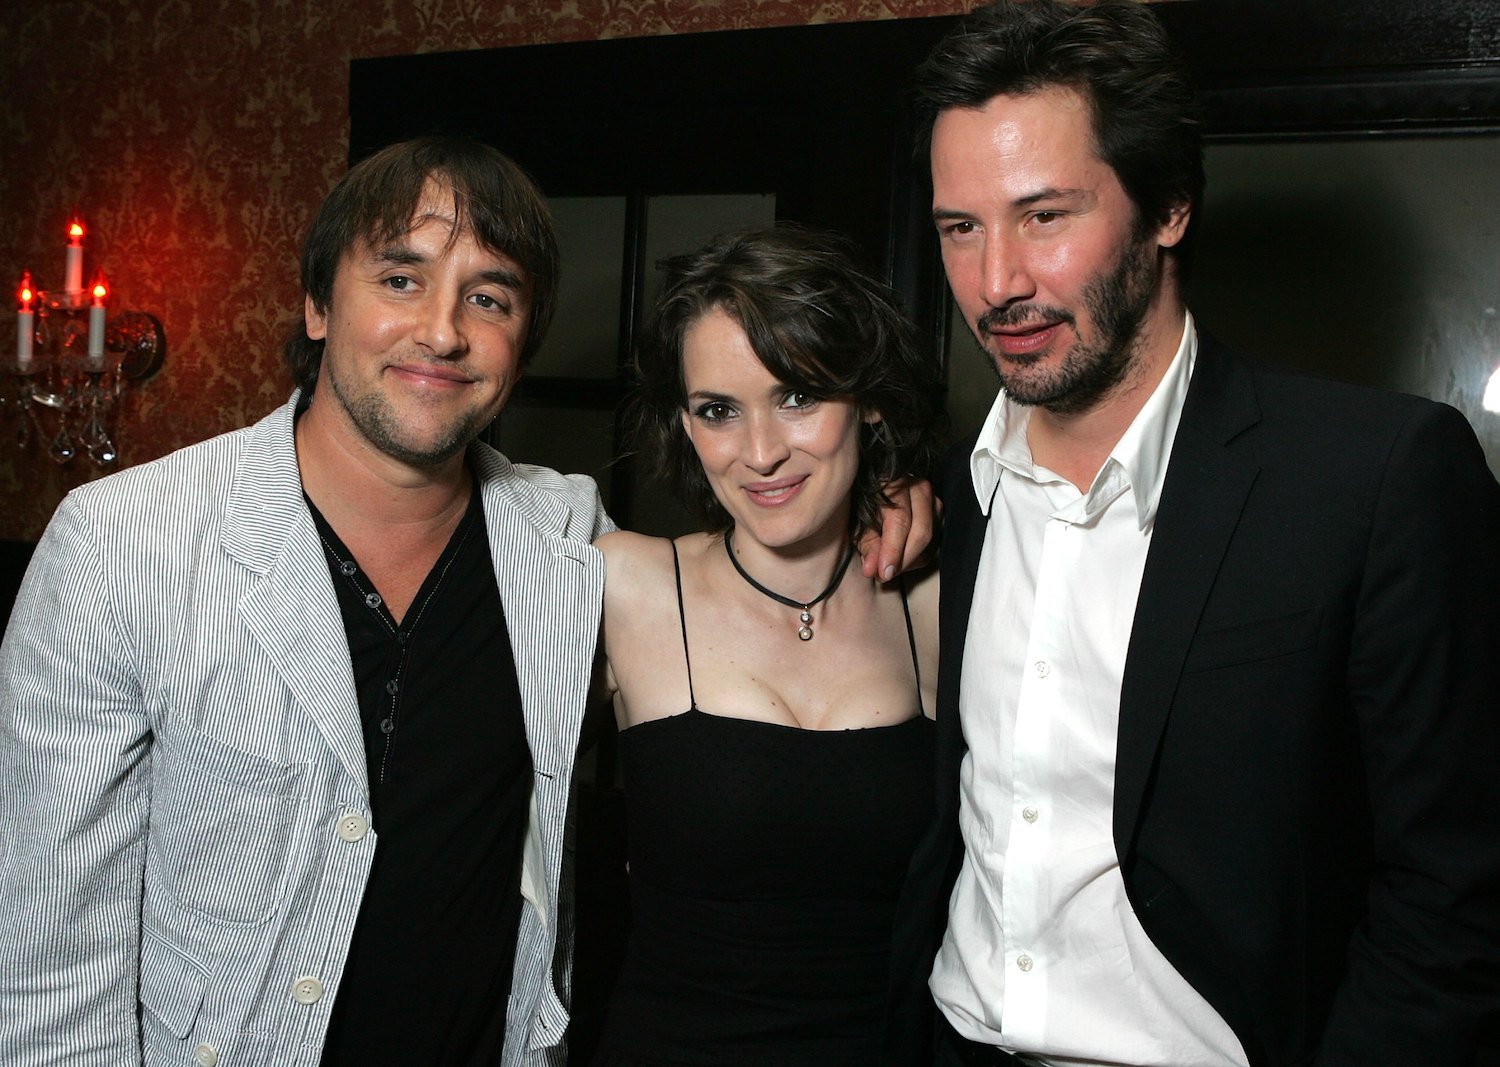 Winona Ryder, Keanu Reeves with Richard Linklater at the Los Angeles premiere after party of 'A Scanner Darkly' 